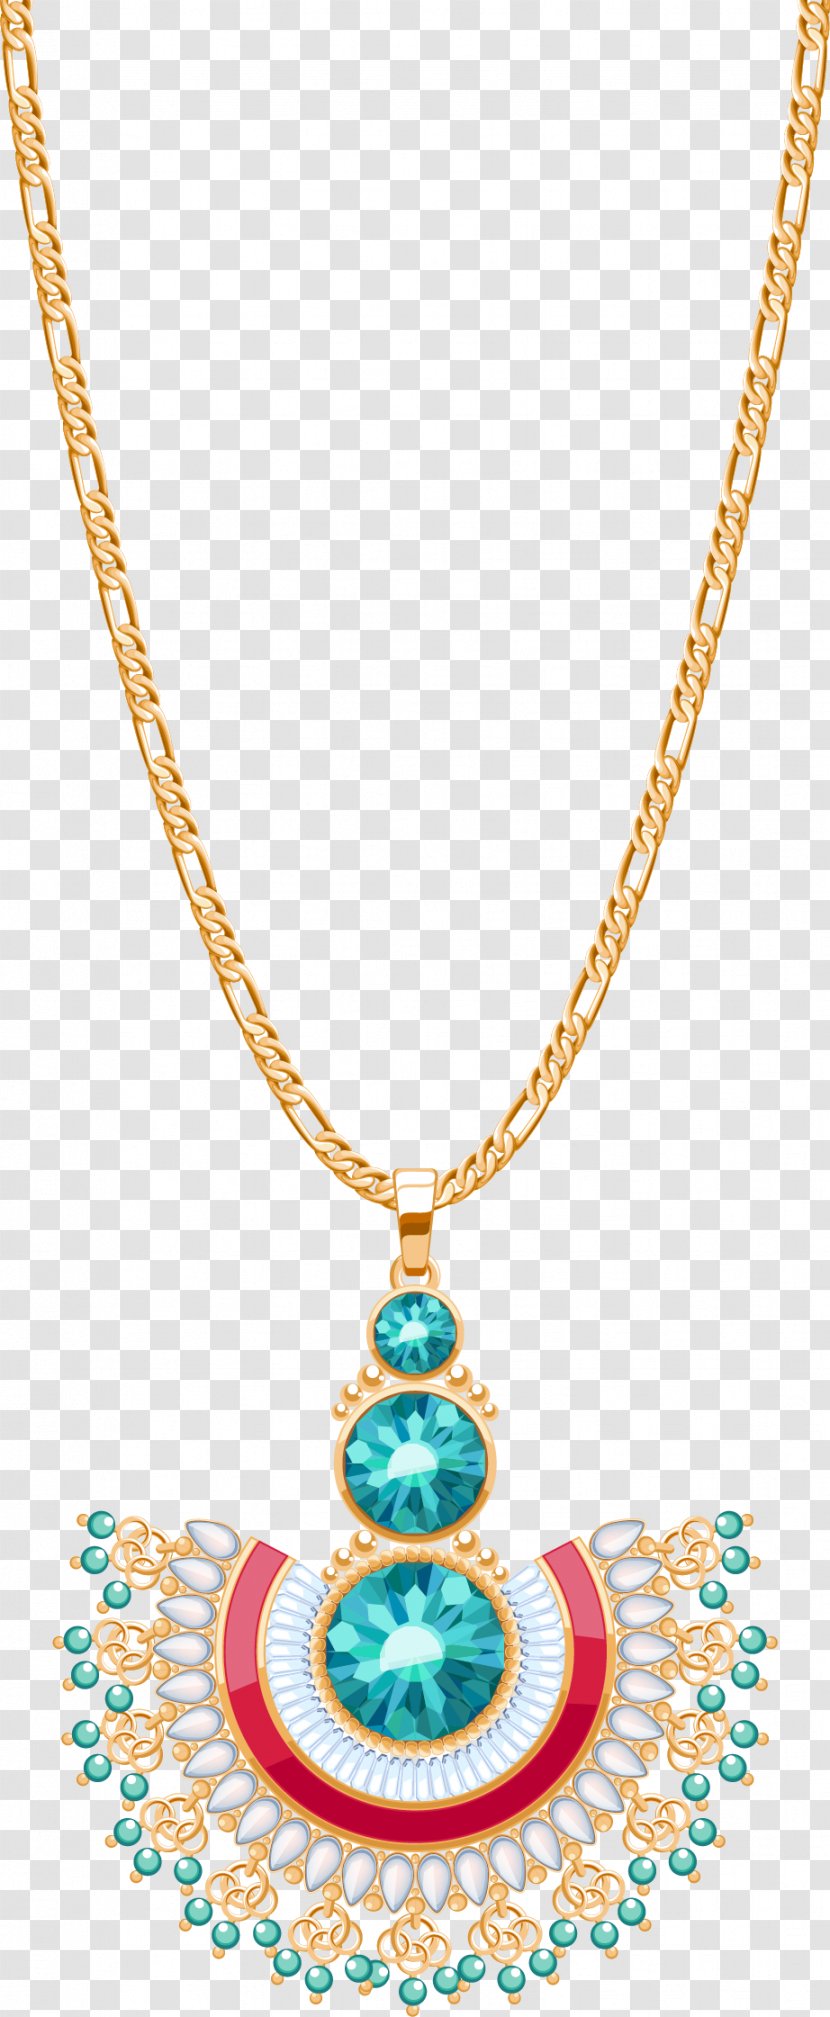 Necklace Jewellery Pendant Pearl - Ruby - Dazzling Jewelry Diamond Transparent PNG